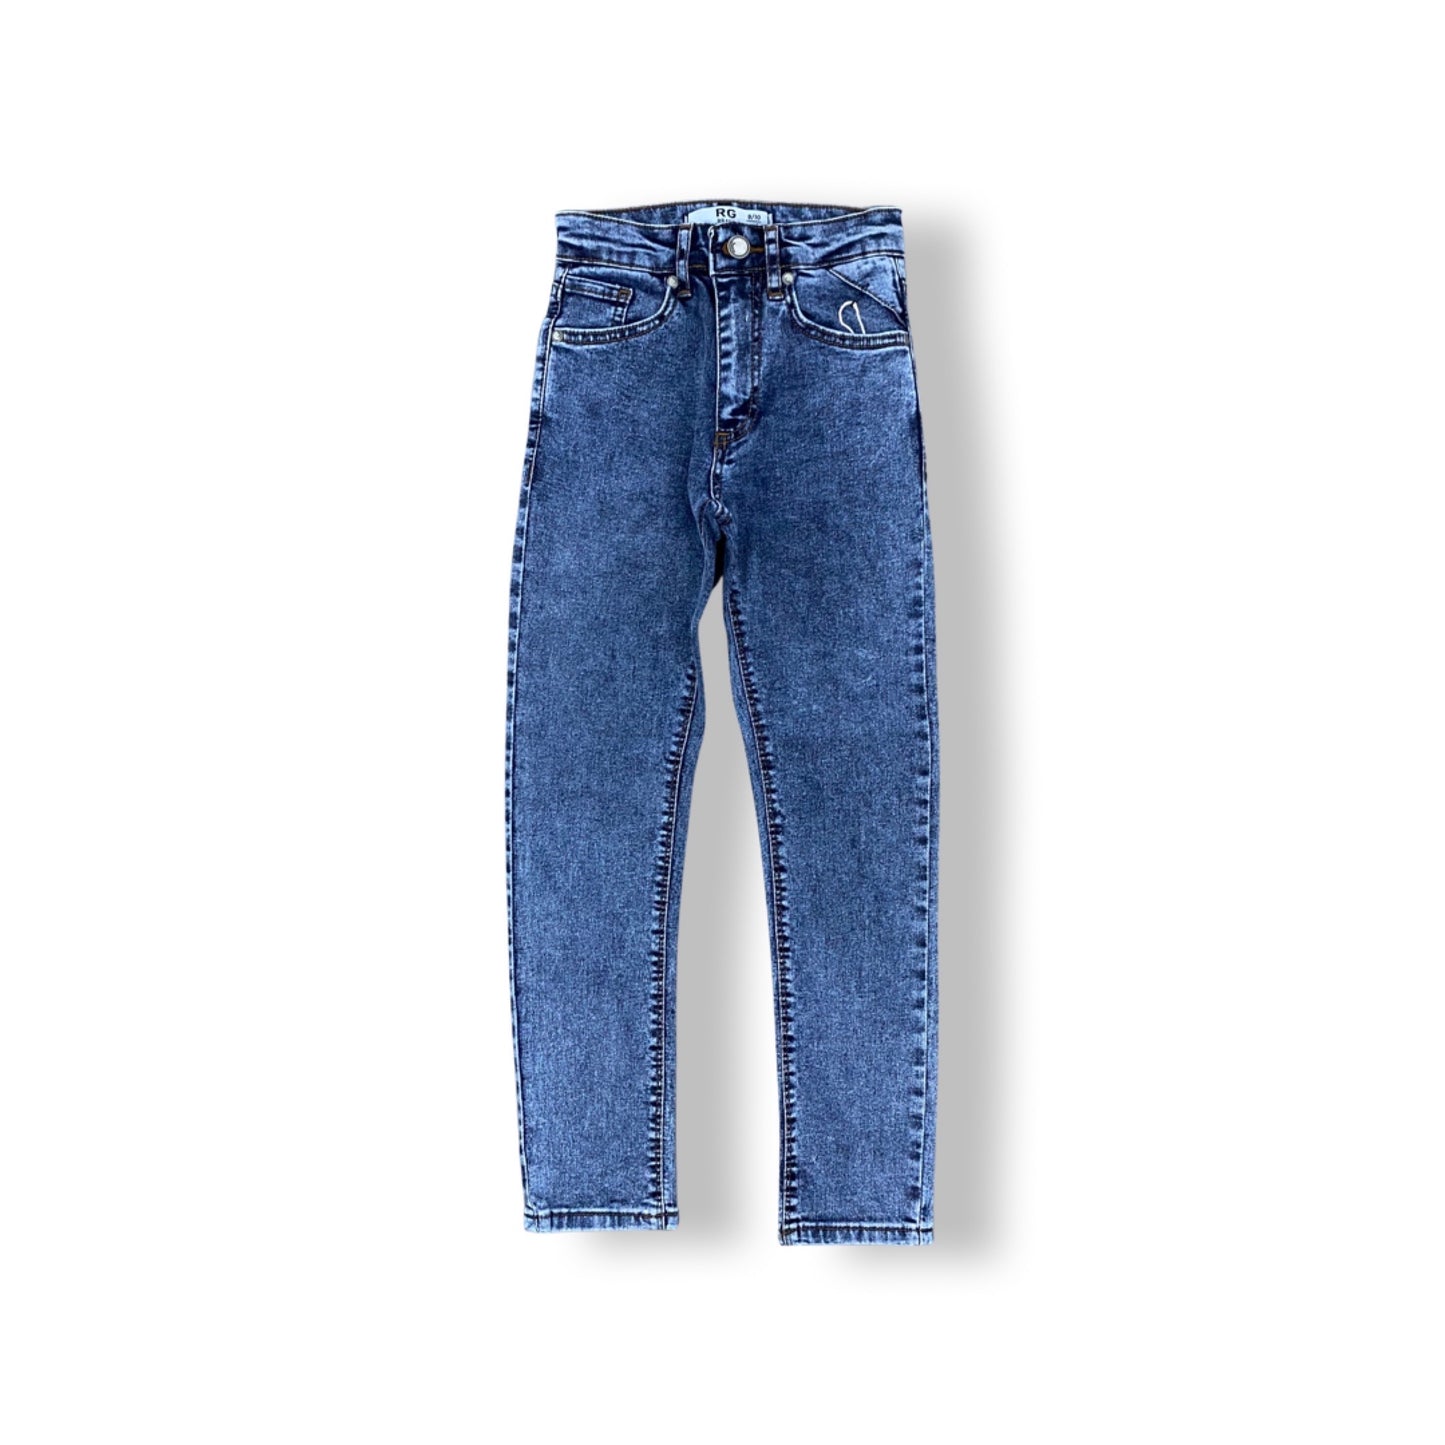 Unisex Young Jeans